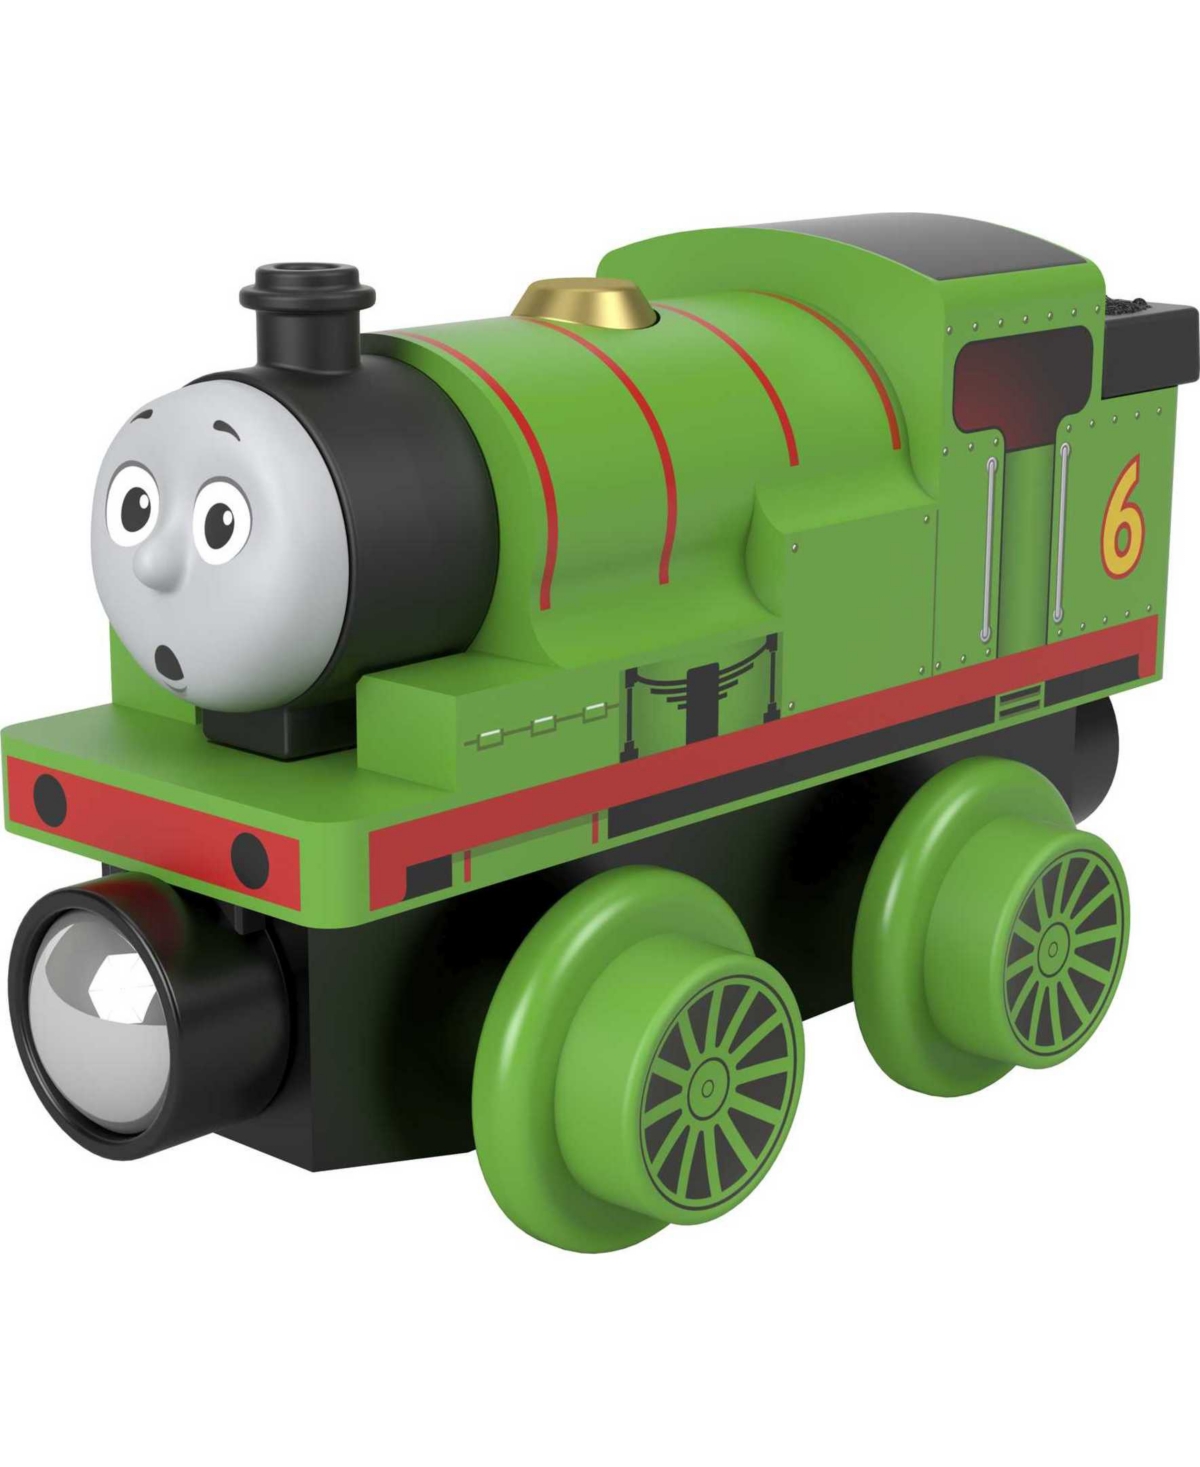 Fisher Price Kids' Thomas Friends Wooden Railway, Percy Engine Toy In Multi